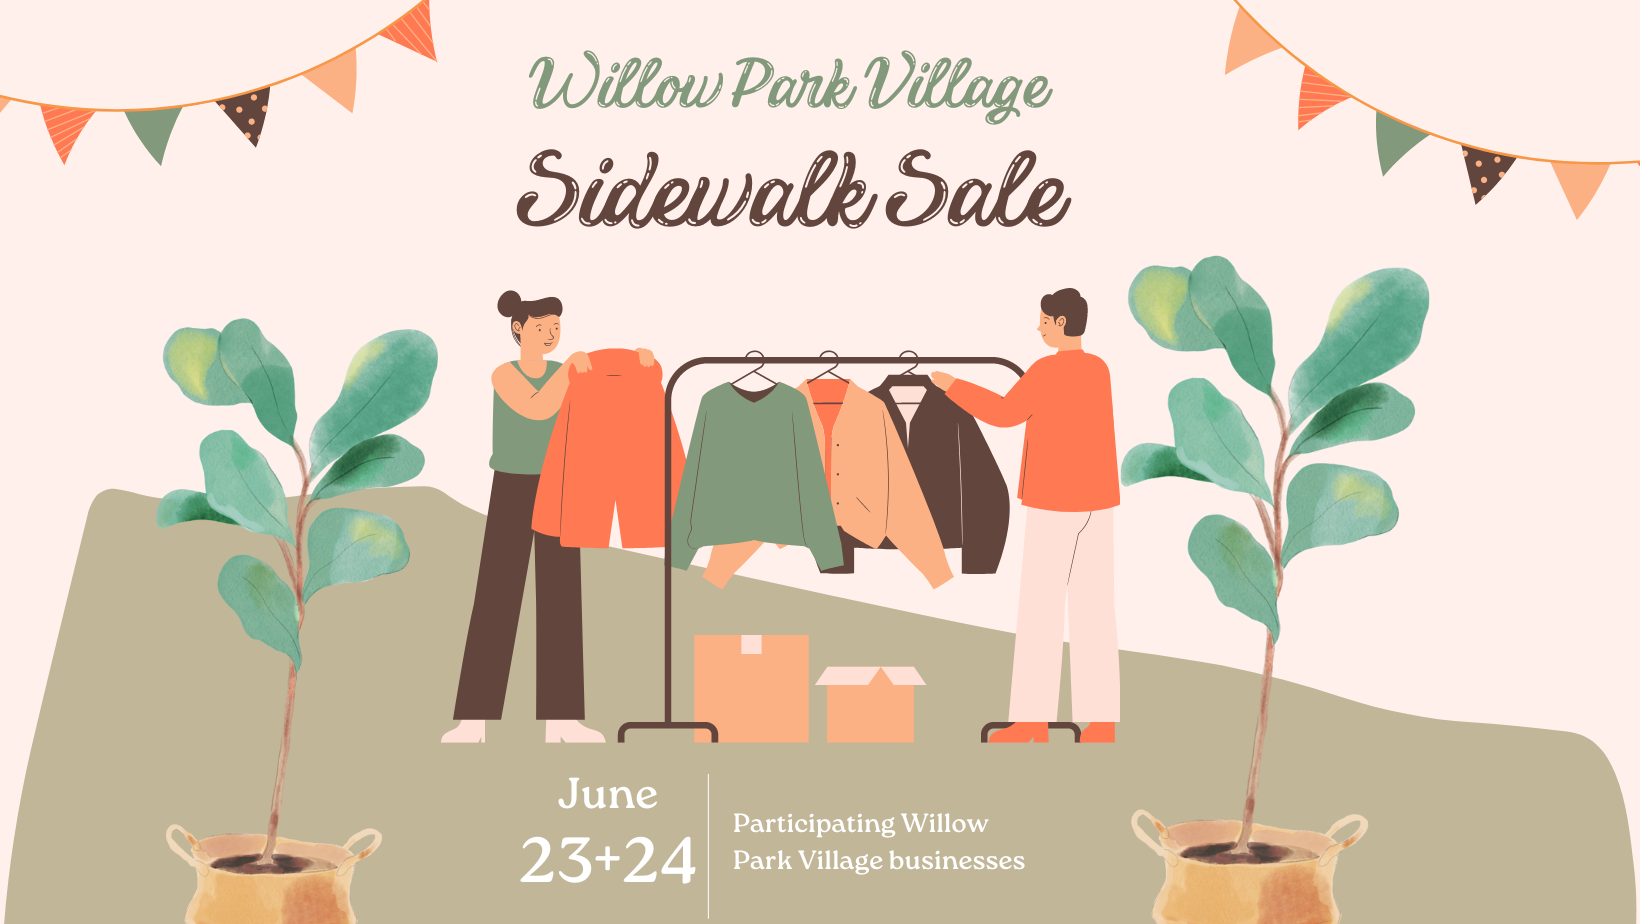 Heading “Willow Park Village Sidewalk Sale” with the subtext “June 23 + 24. Participating Willow Park Village businesses”. The illustration is two people looking at clothes on a clothing rack.